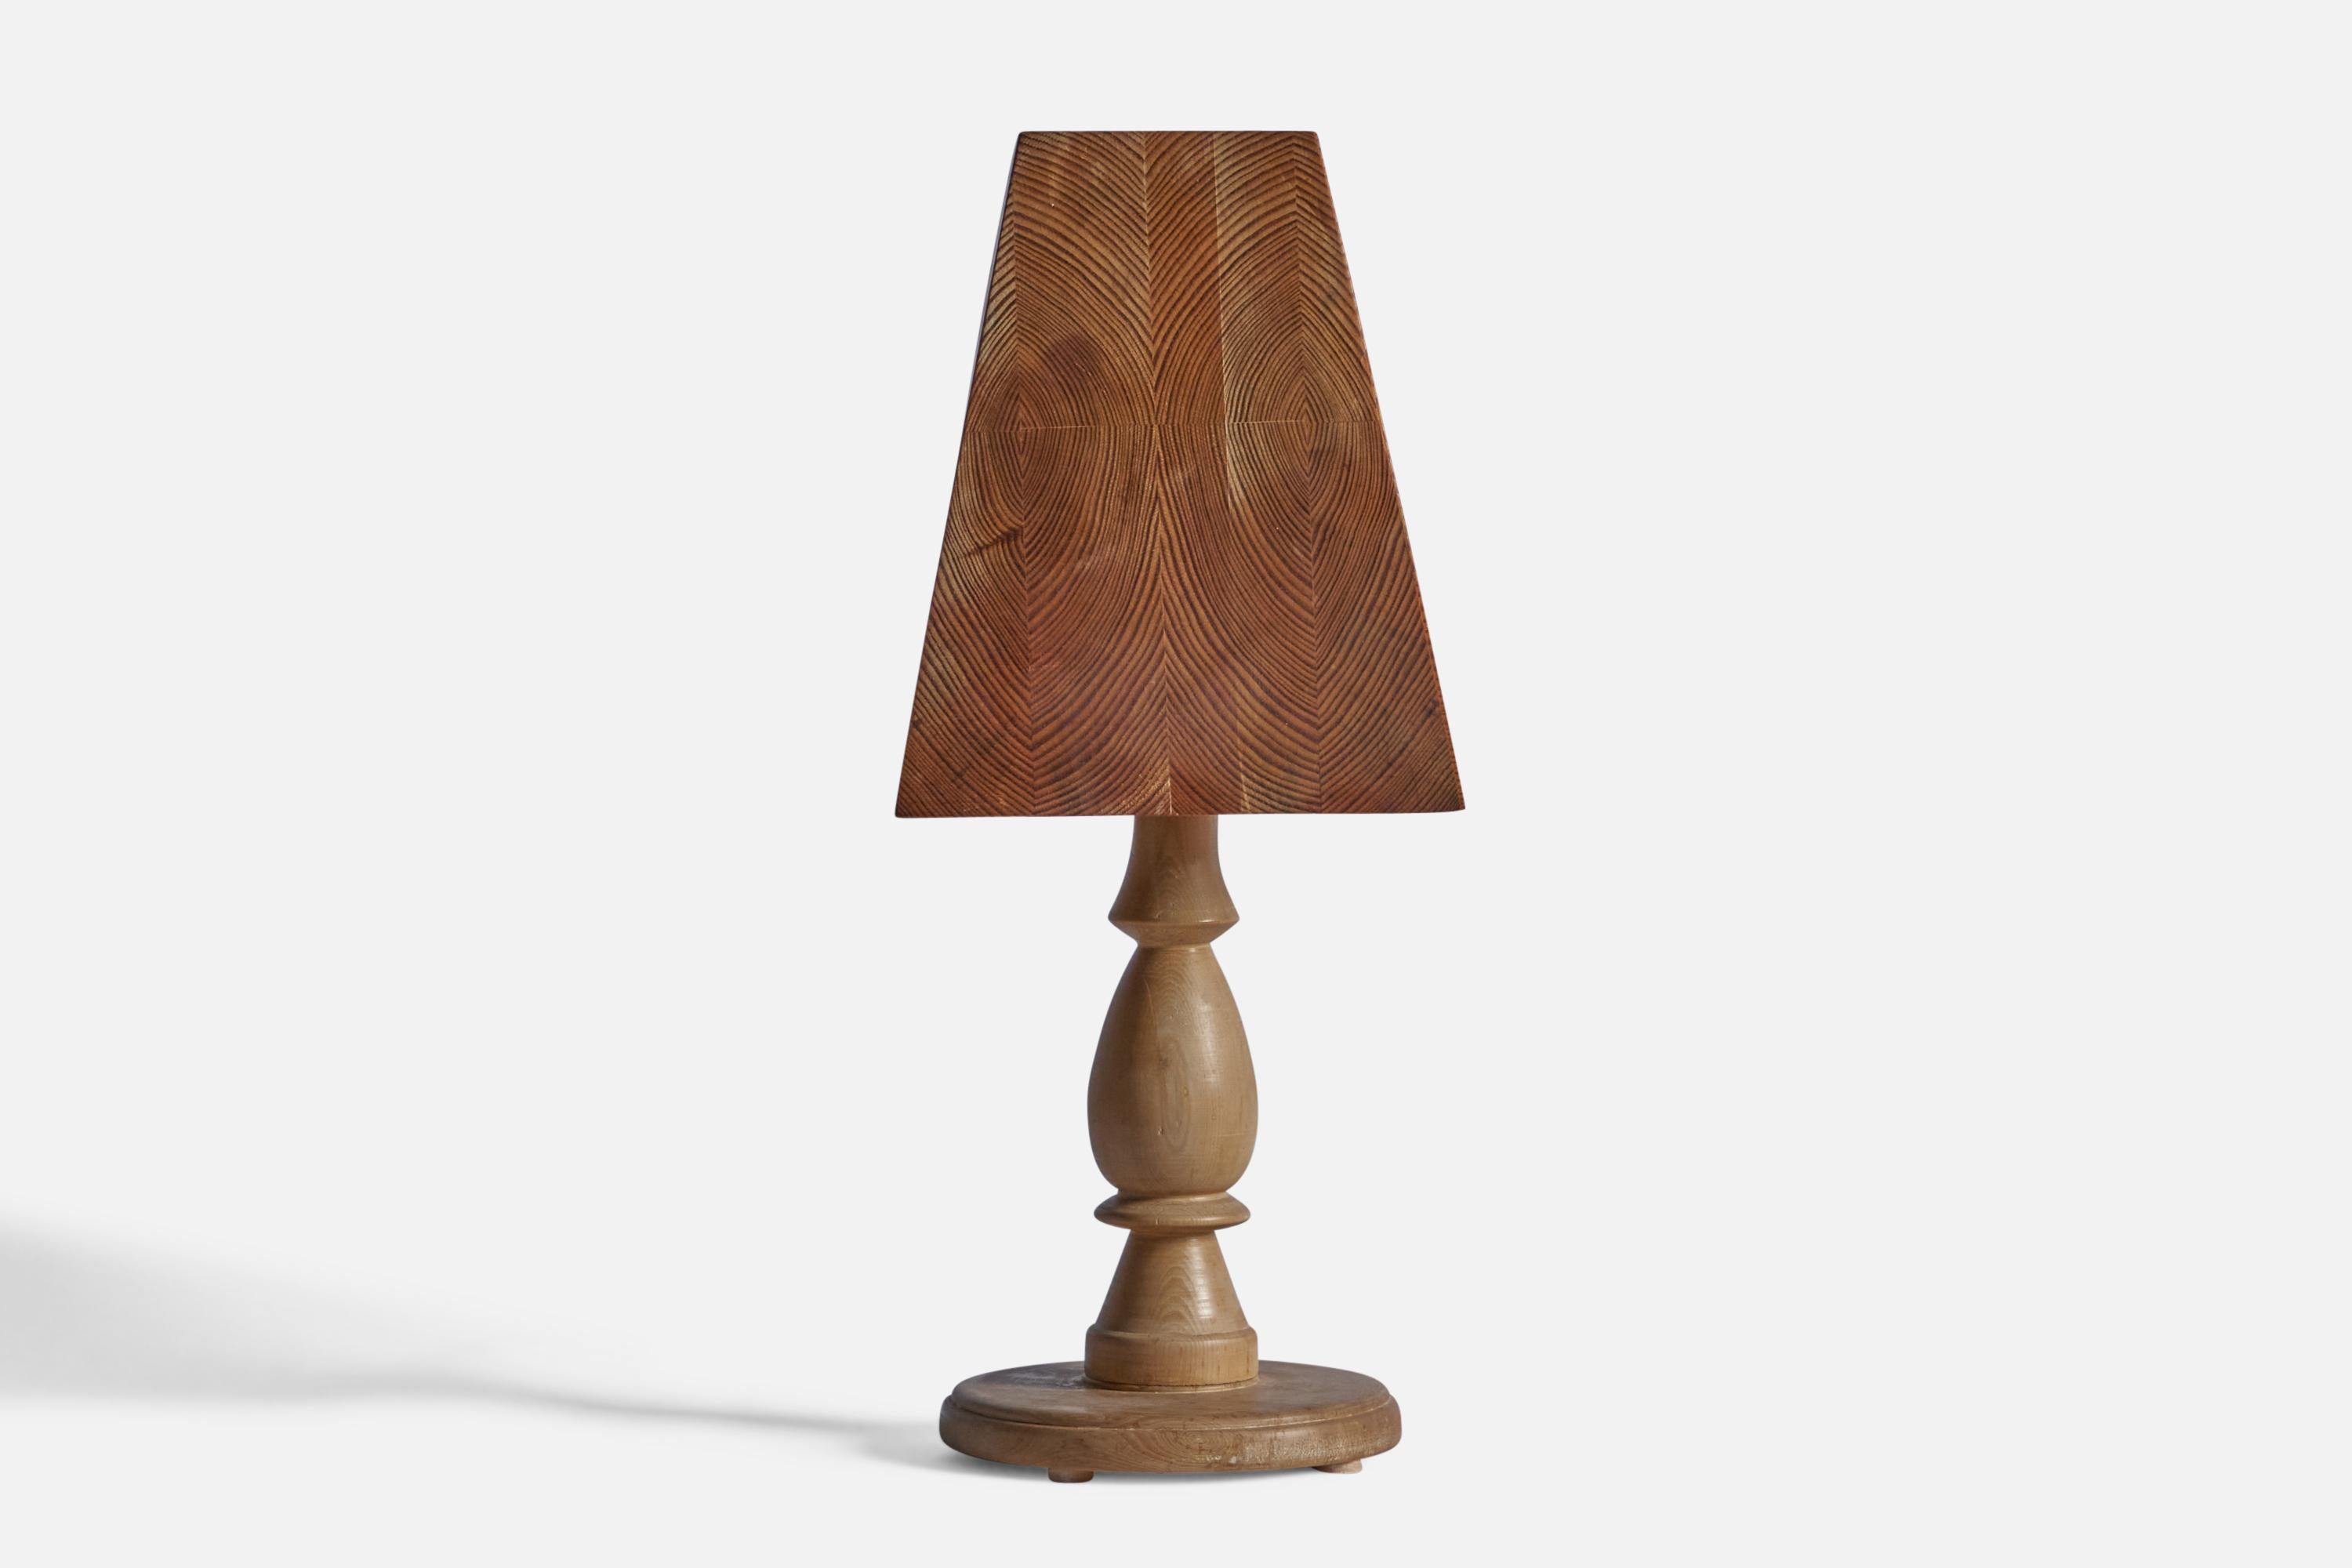 A pine and birch table lamp, designed and produced in Sweden, 1970s.